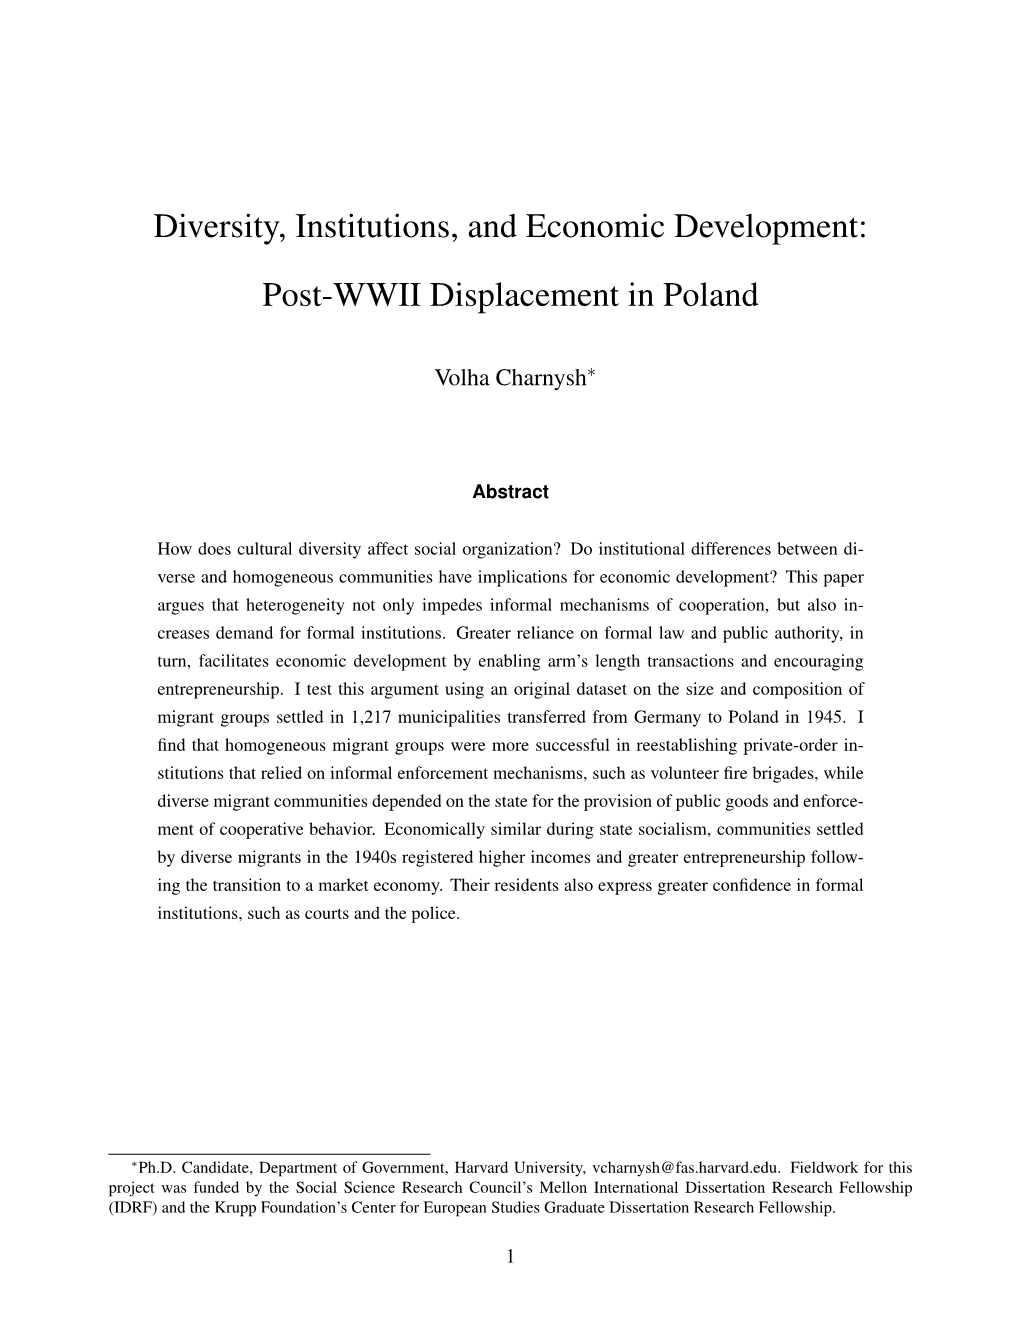 Diversity, Institutions, and Economic Development: Post-WWII Displacement in Poland